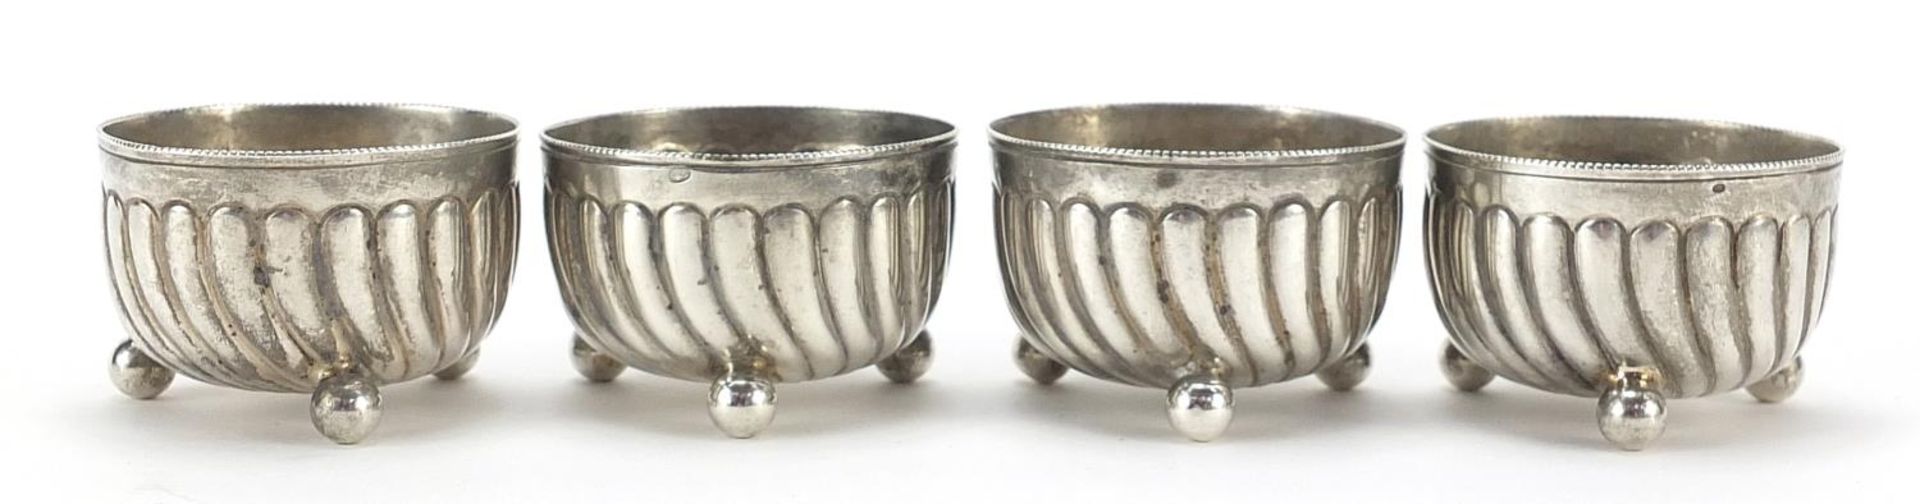 Horace Woodward & Co, set of four Victorian silver open salts with ball feet, London 1890, 3cm - Image 2 of 4